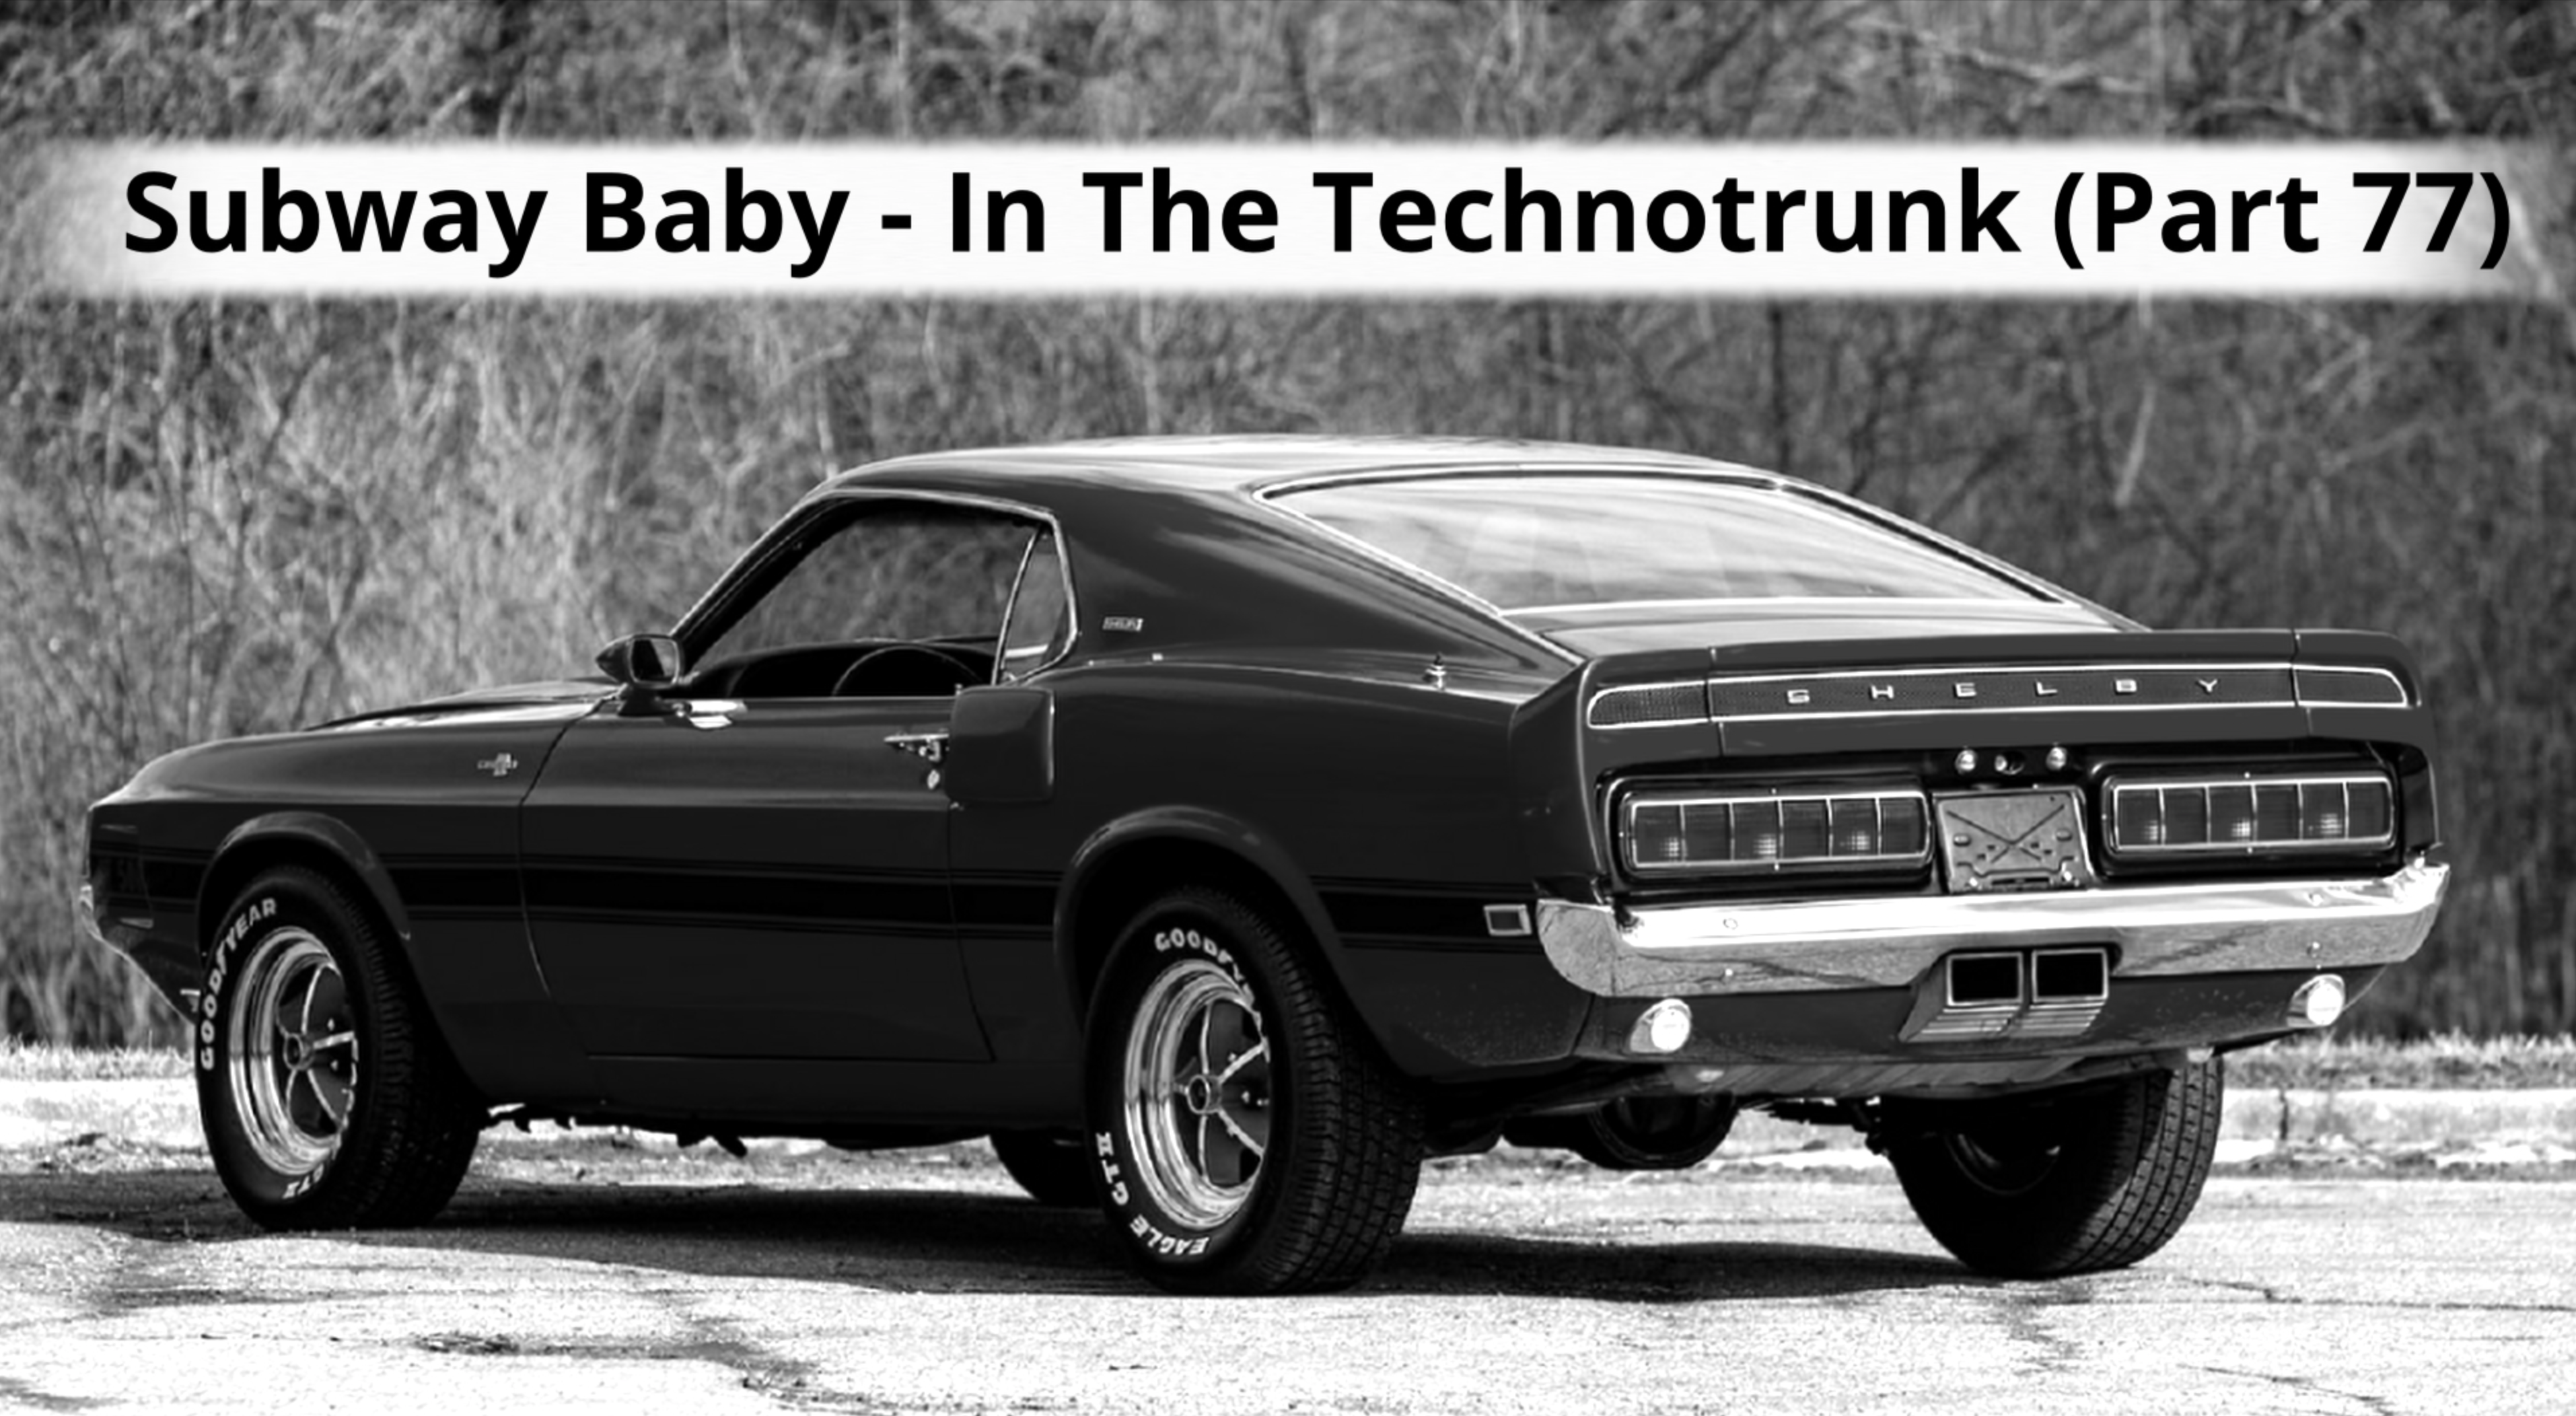 Subway Baby-In The Technotrunk (Part 77)